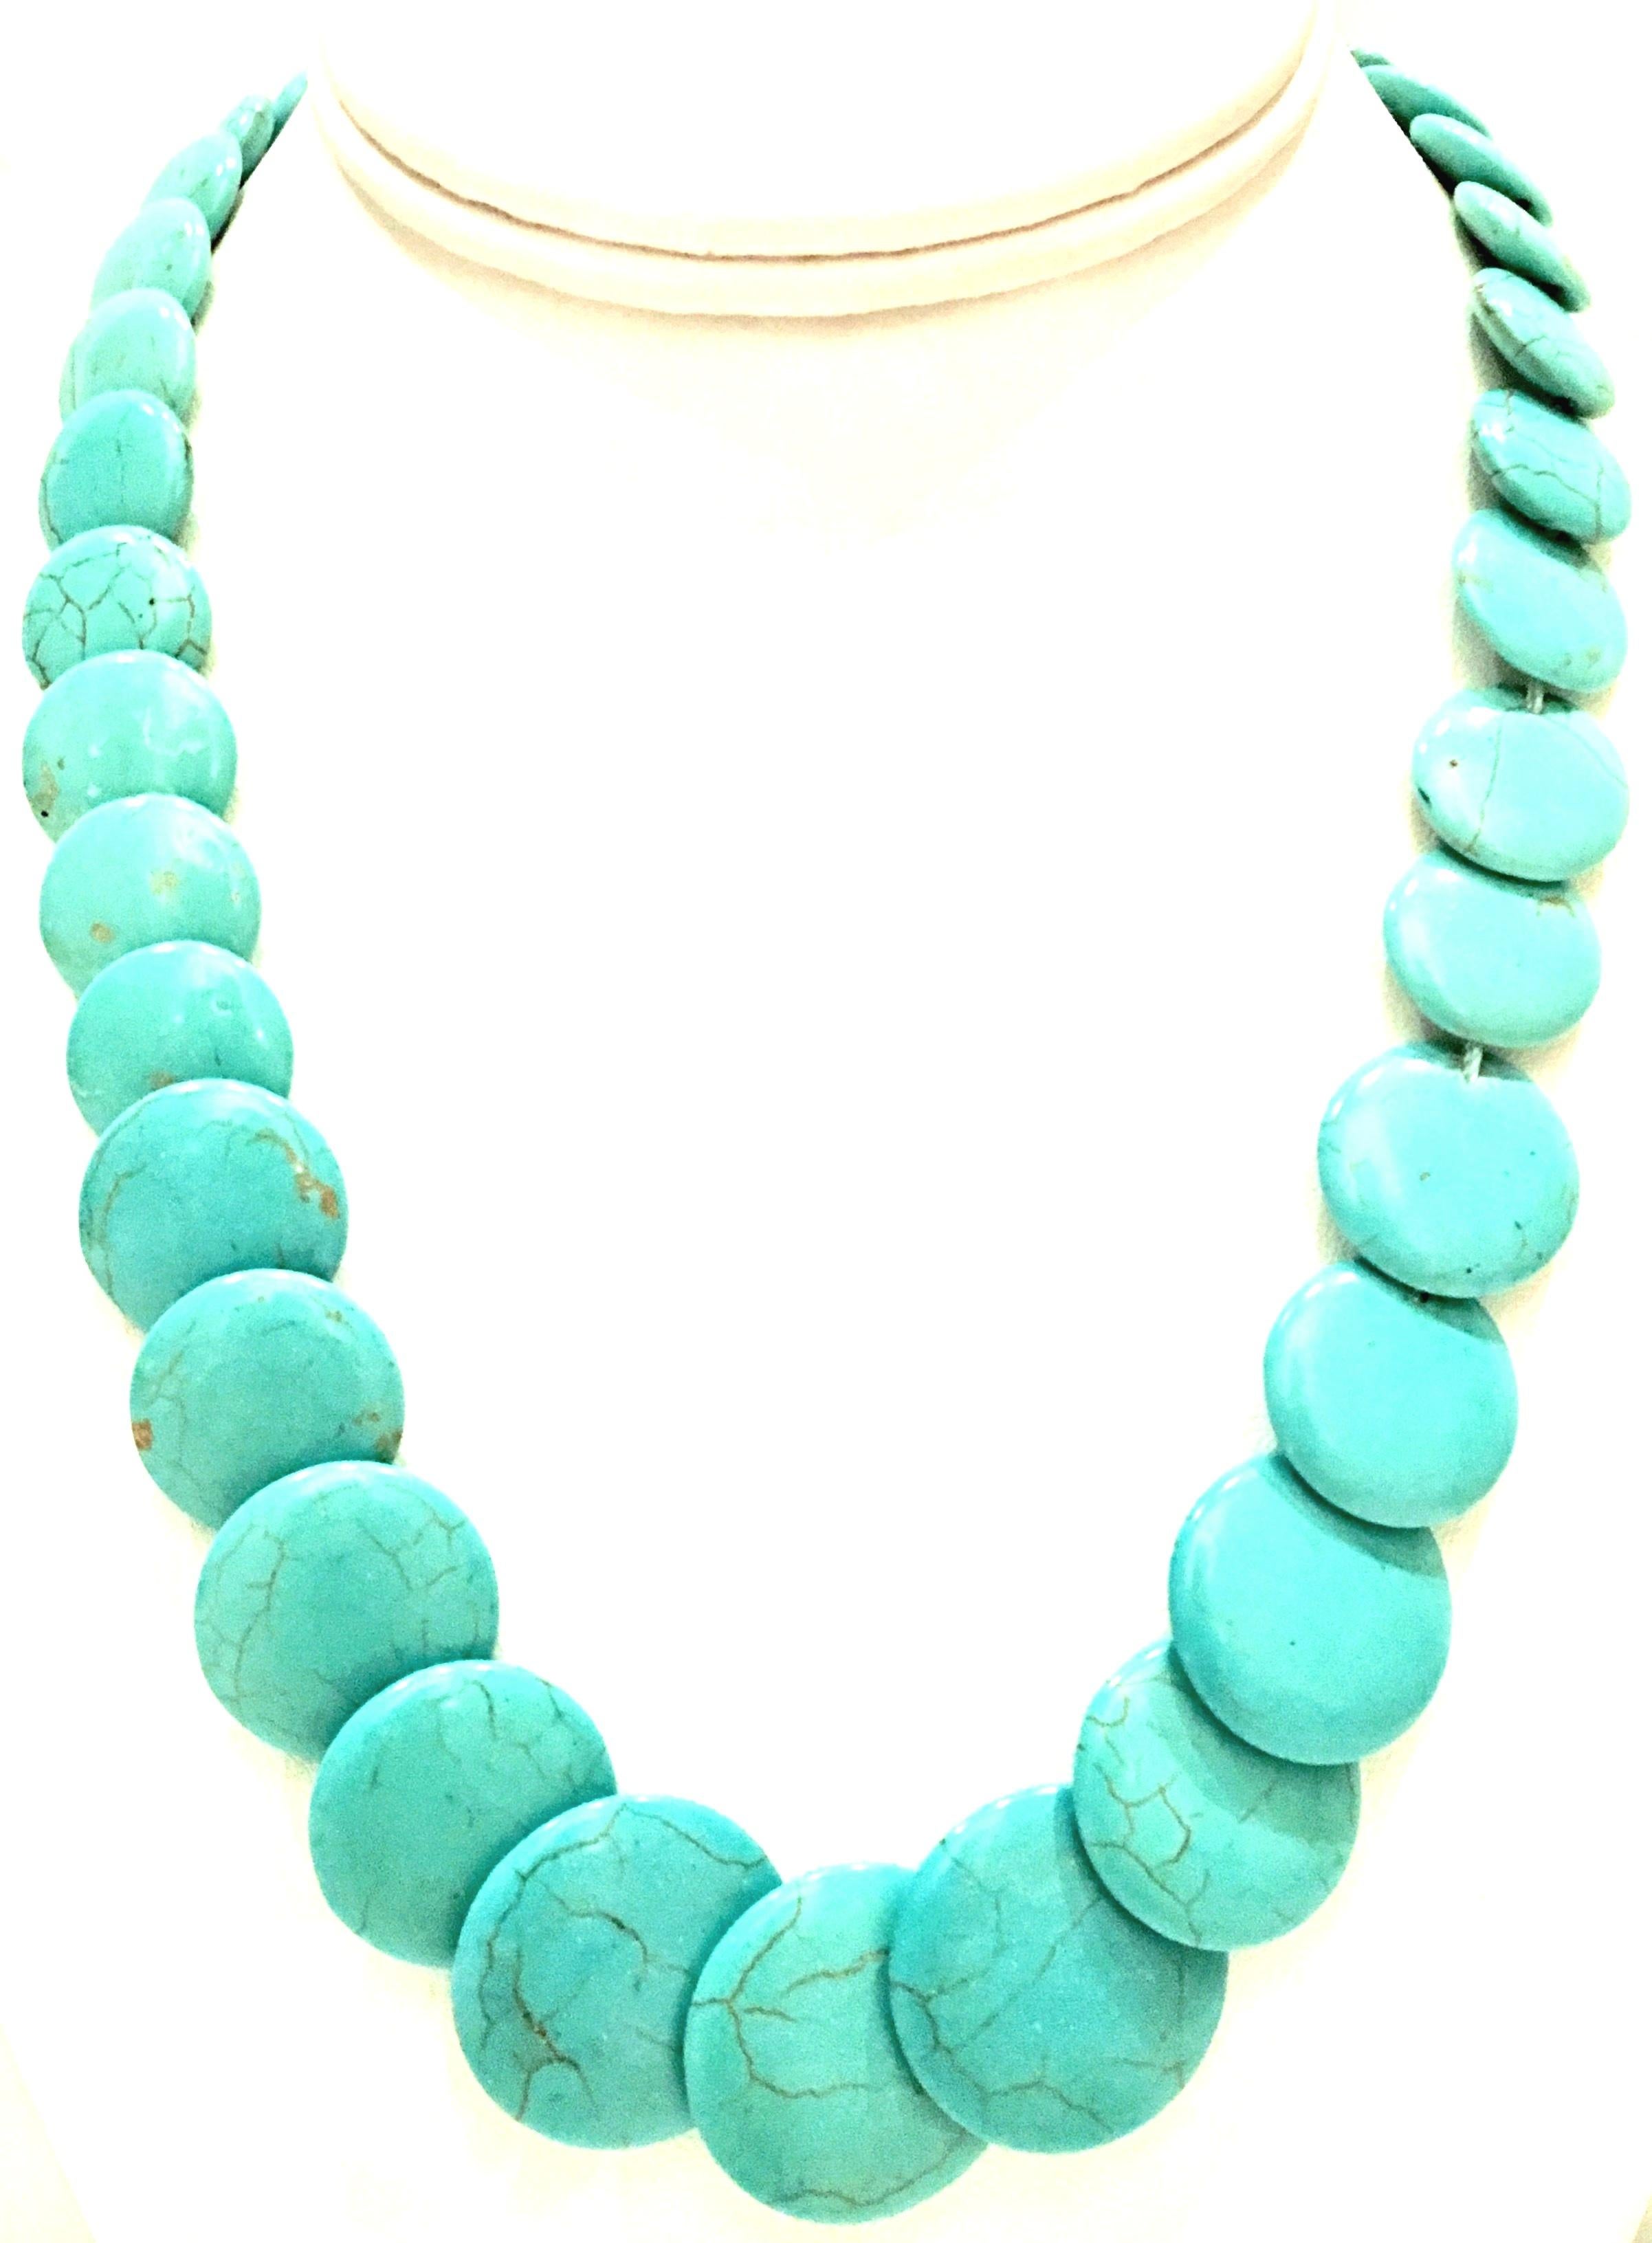 20th Century Classic & Timeless Authentic polished turquoise graduated bead, disc shaped necklace. The largest turquoise beads measure 1' inch diameter. Total weight 62 grams. The locking clasp is silver rhodium plate.